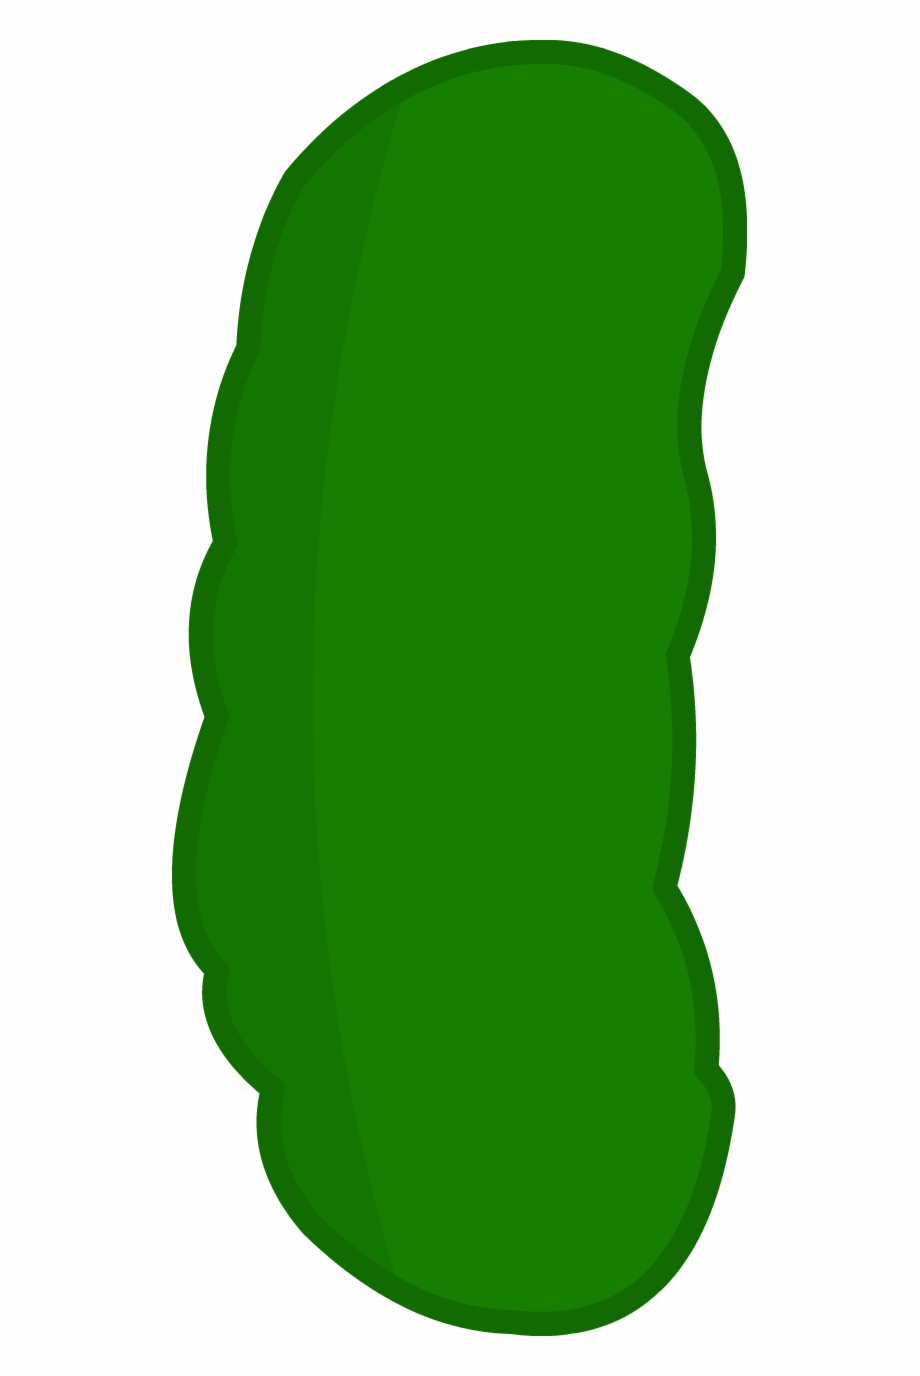 Pickle Clipart Pixel Art Inanimate Insanity Pickle Body